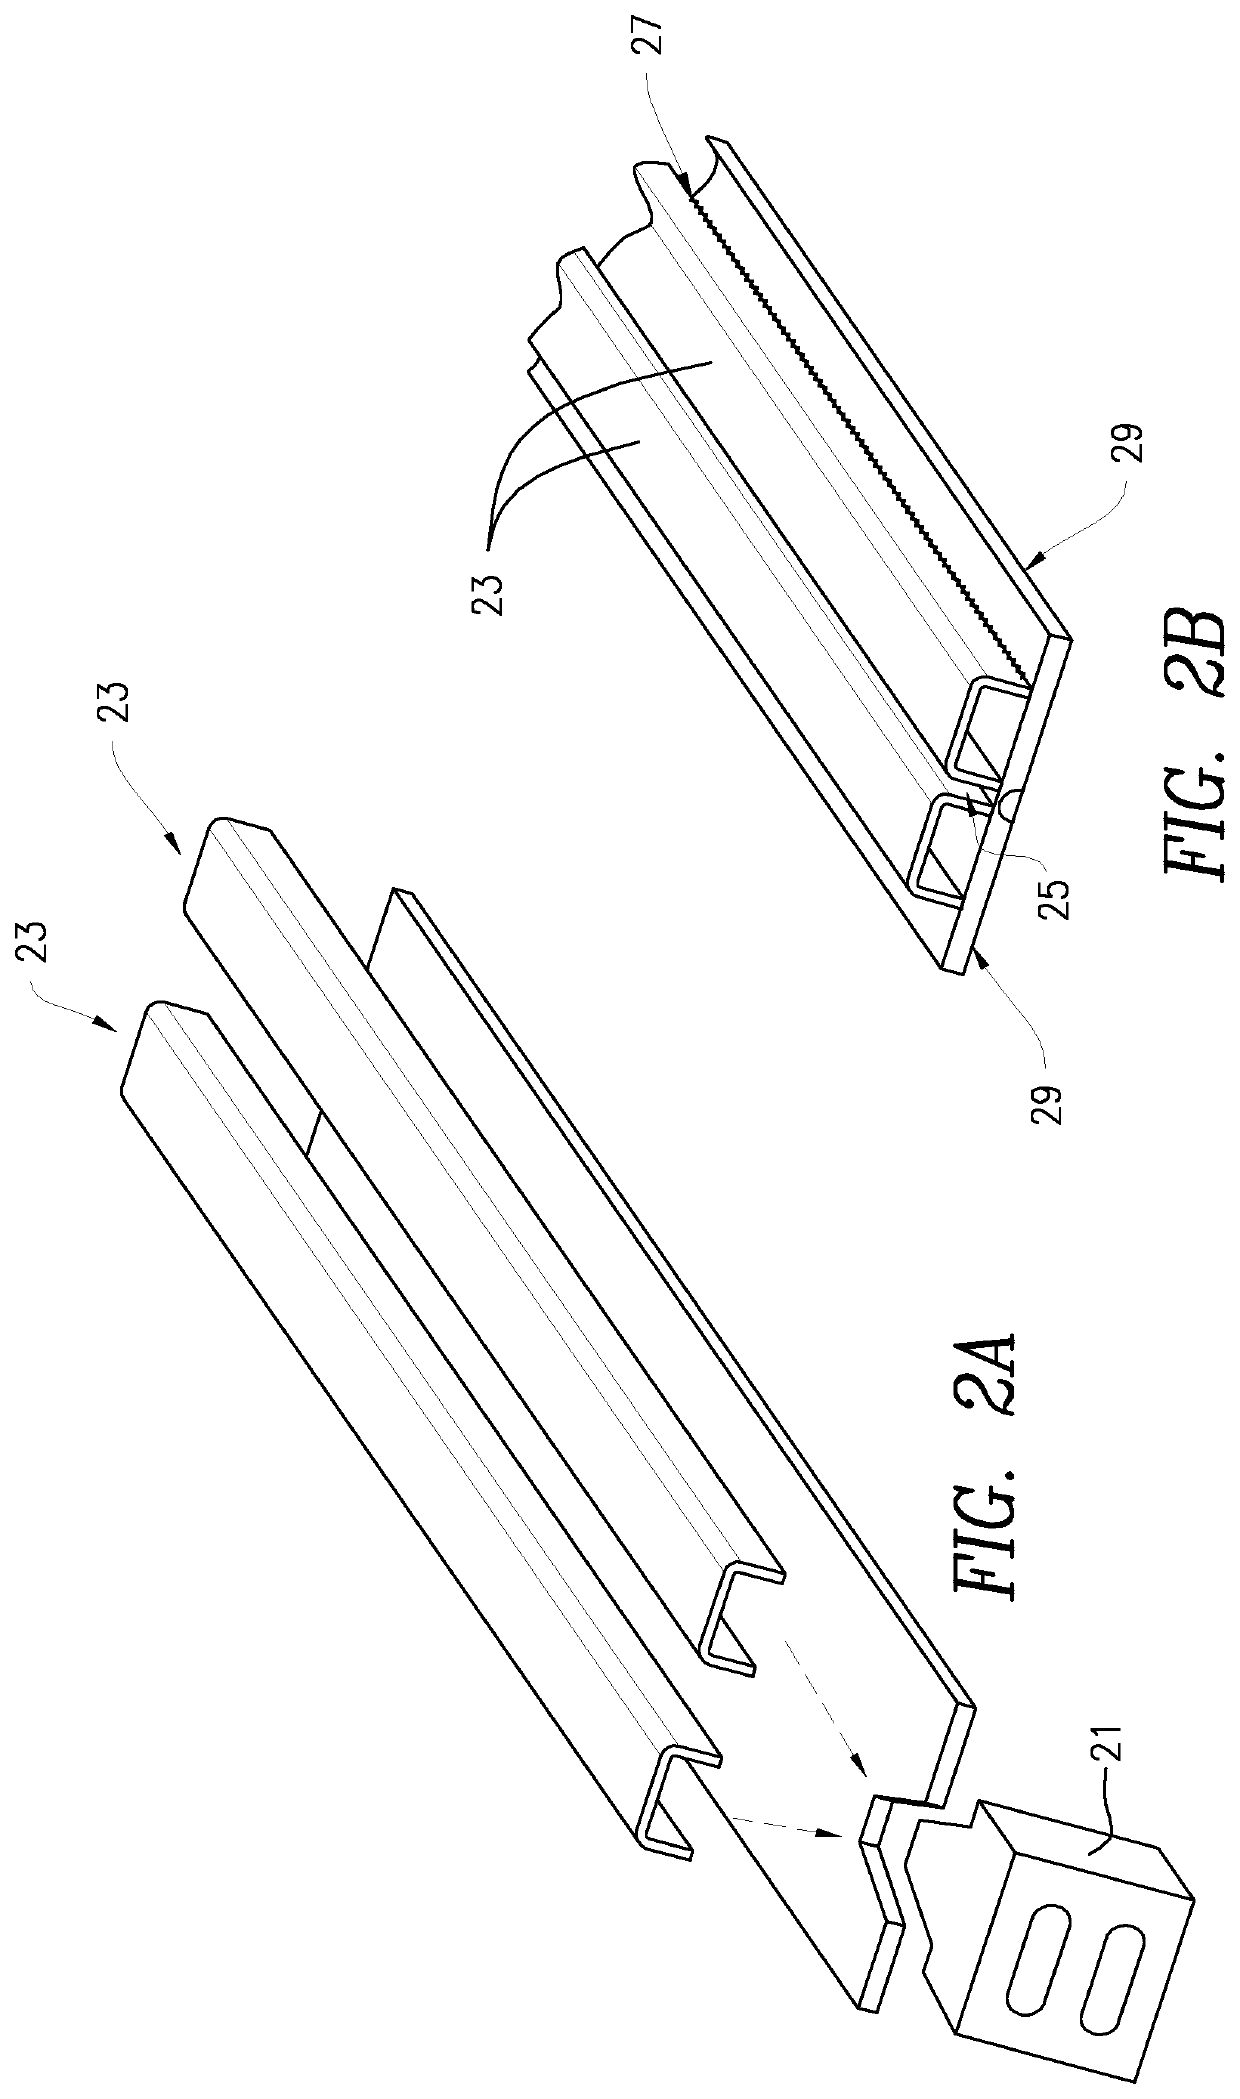 Shipping container and method of construction thereof